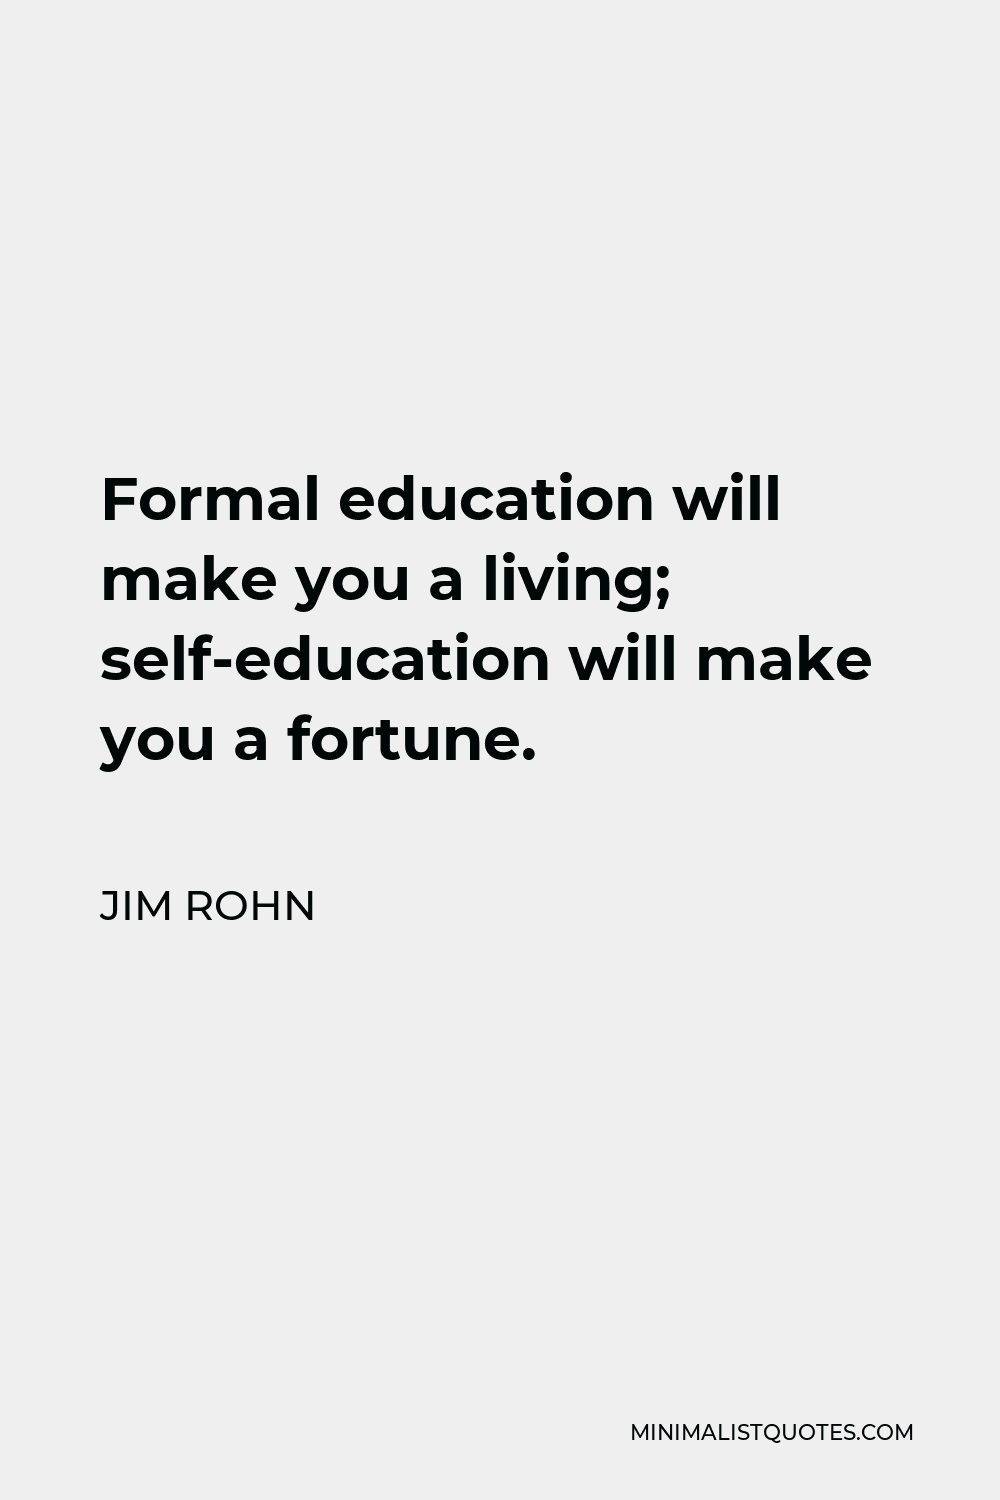 Jim Rohn Quote - Formal education will make you a living; self-education will make you a fortune.